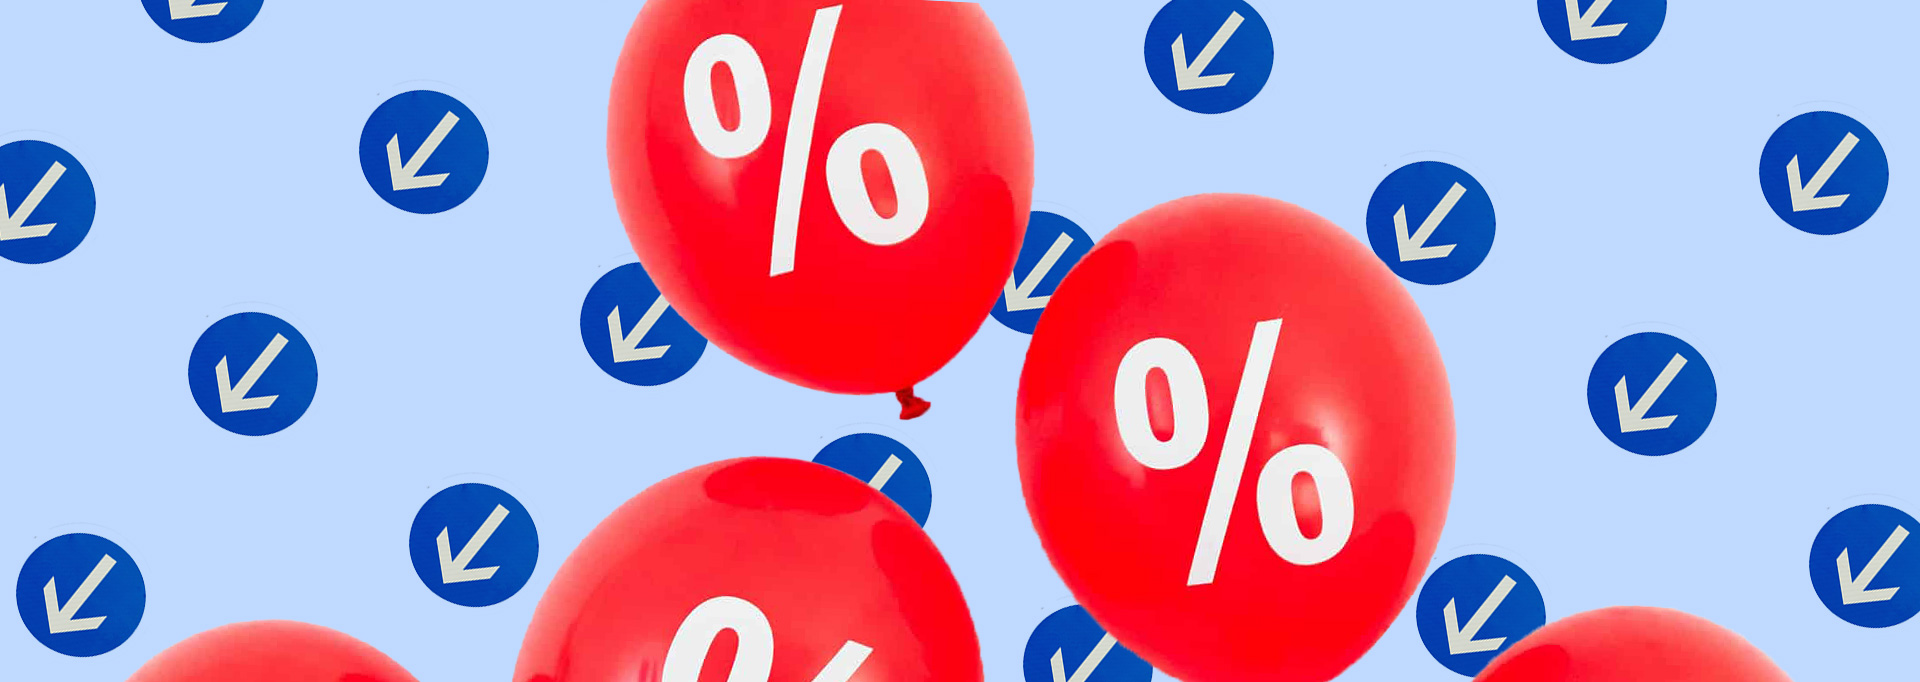 interest signs on balloons over arrow background